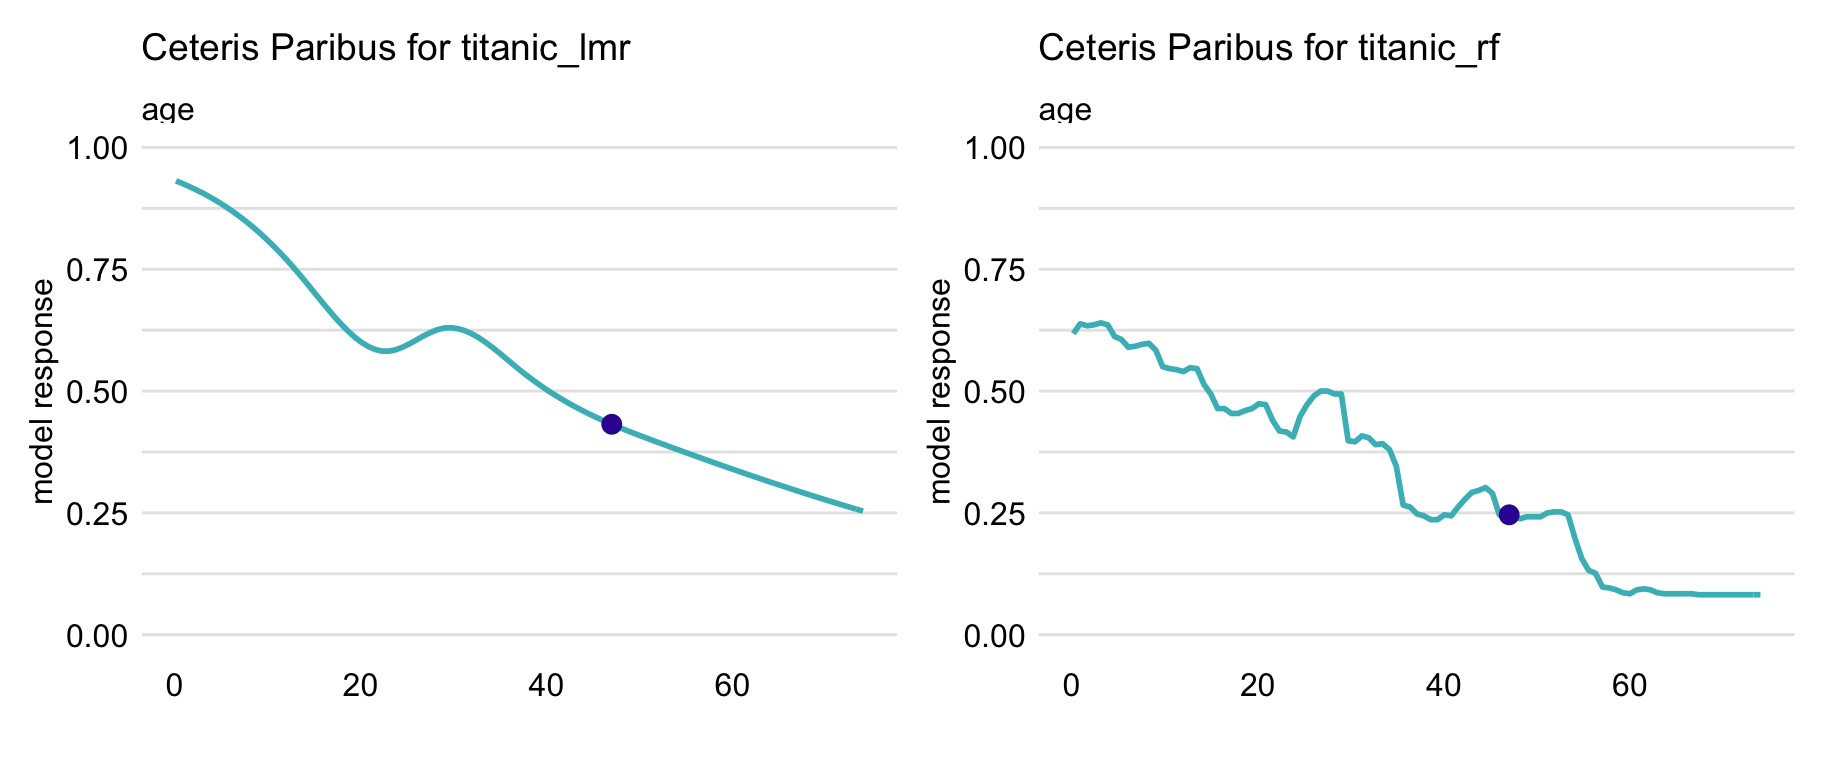 Ceteris-paribus profiles for variable age for the logistic regression (titanic_lmr) and random forest (titanic_rf ) models that predict the probability of surviving of passenger Henry based on the Titanic data. Dots indicate the values of the variable and of the prediction for Henry.